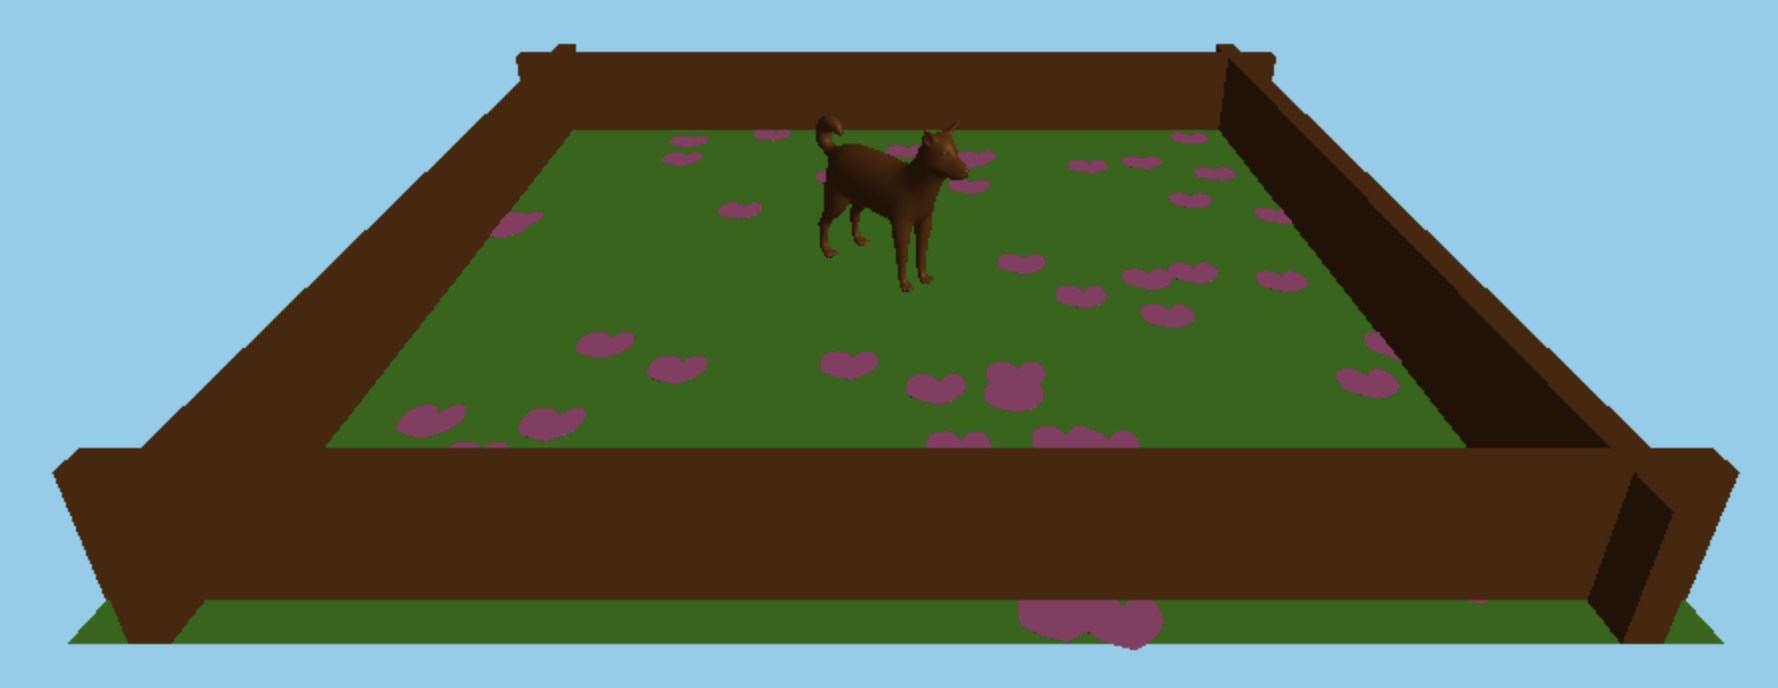 Screenshot of Game with Dog